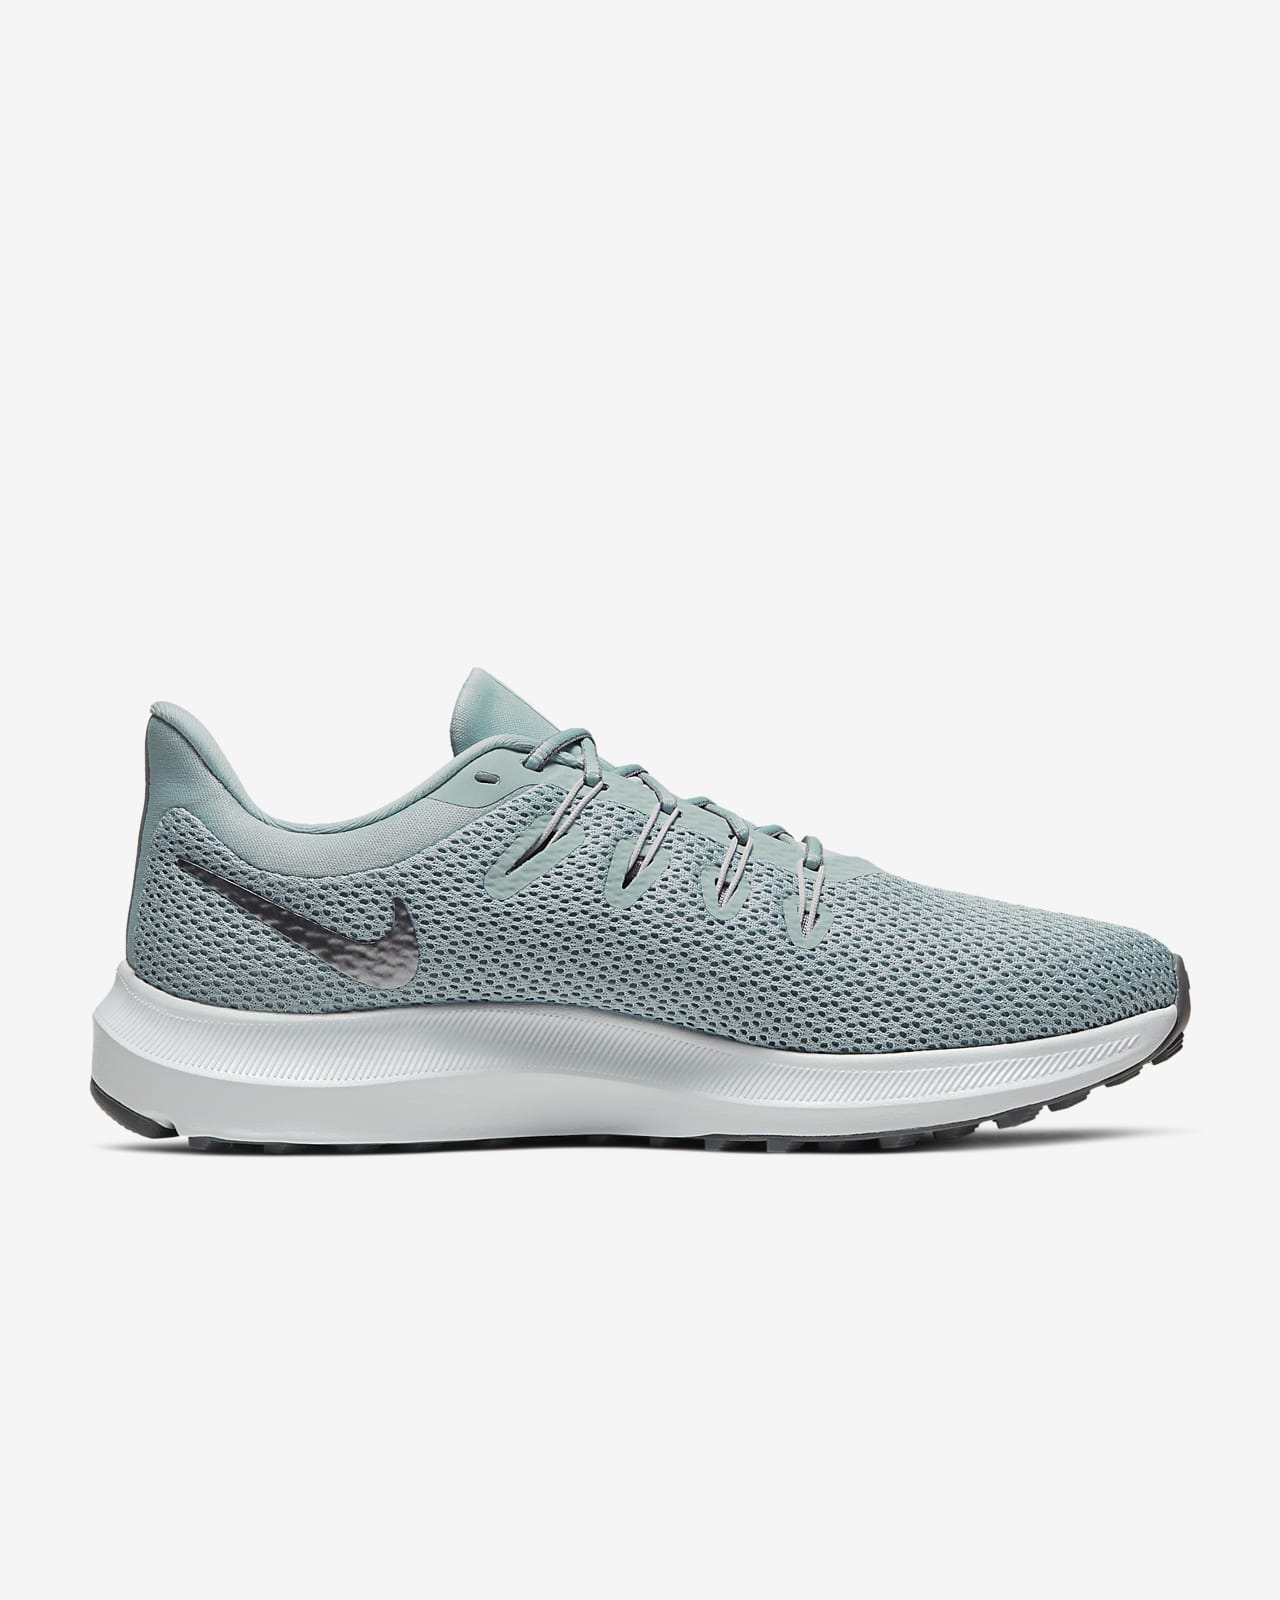 nike quest women's running shoes review